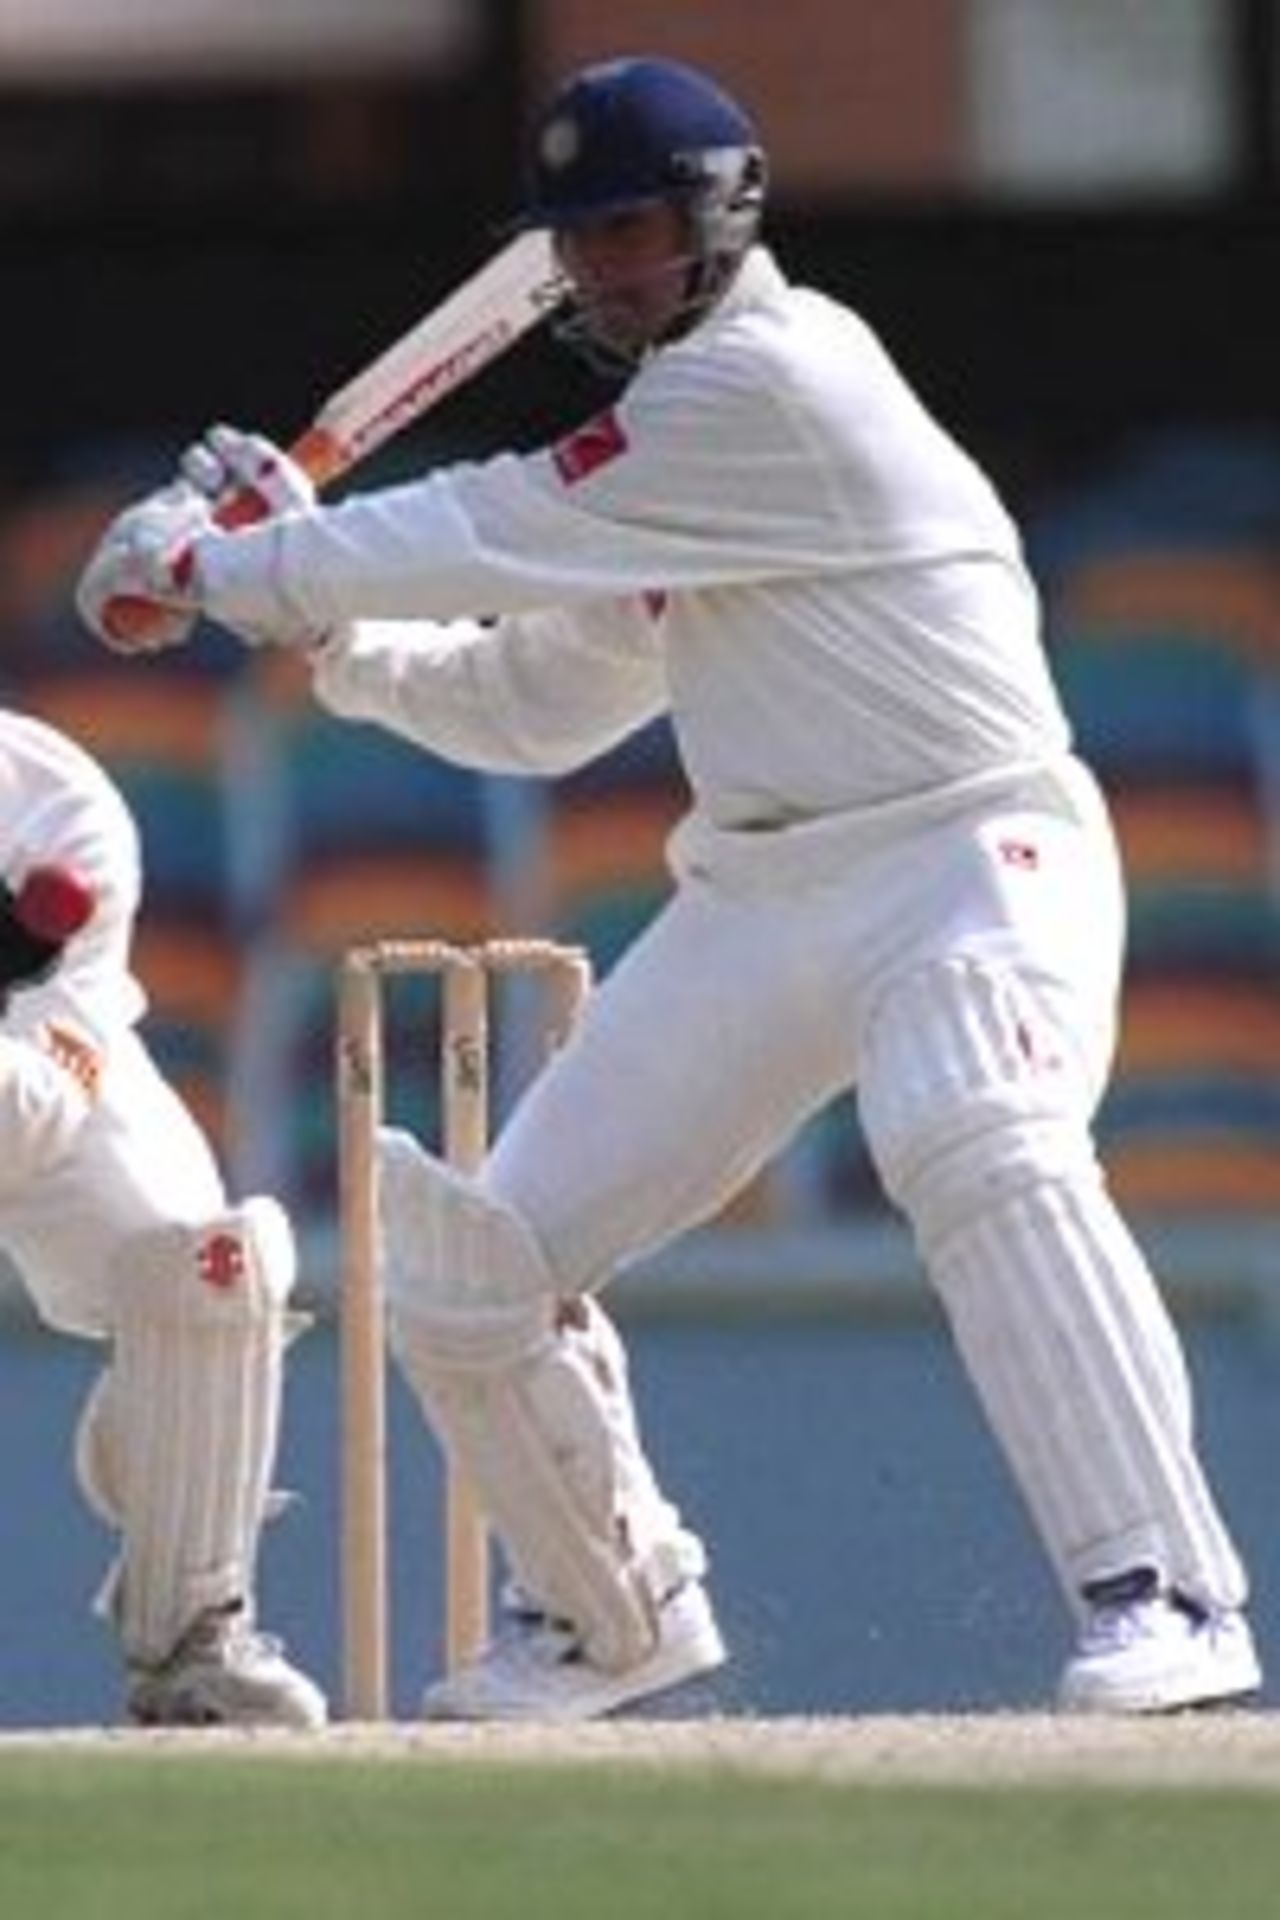 28 Nov 1999: Sadagoppan Ramesh of India in action during the game against Queensland at the Gabba Cricket Ground in Brisbane